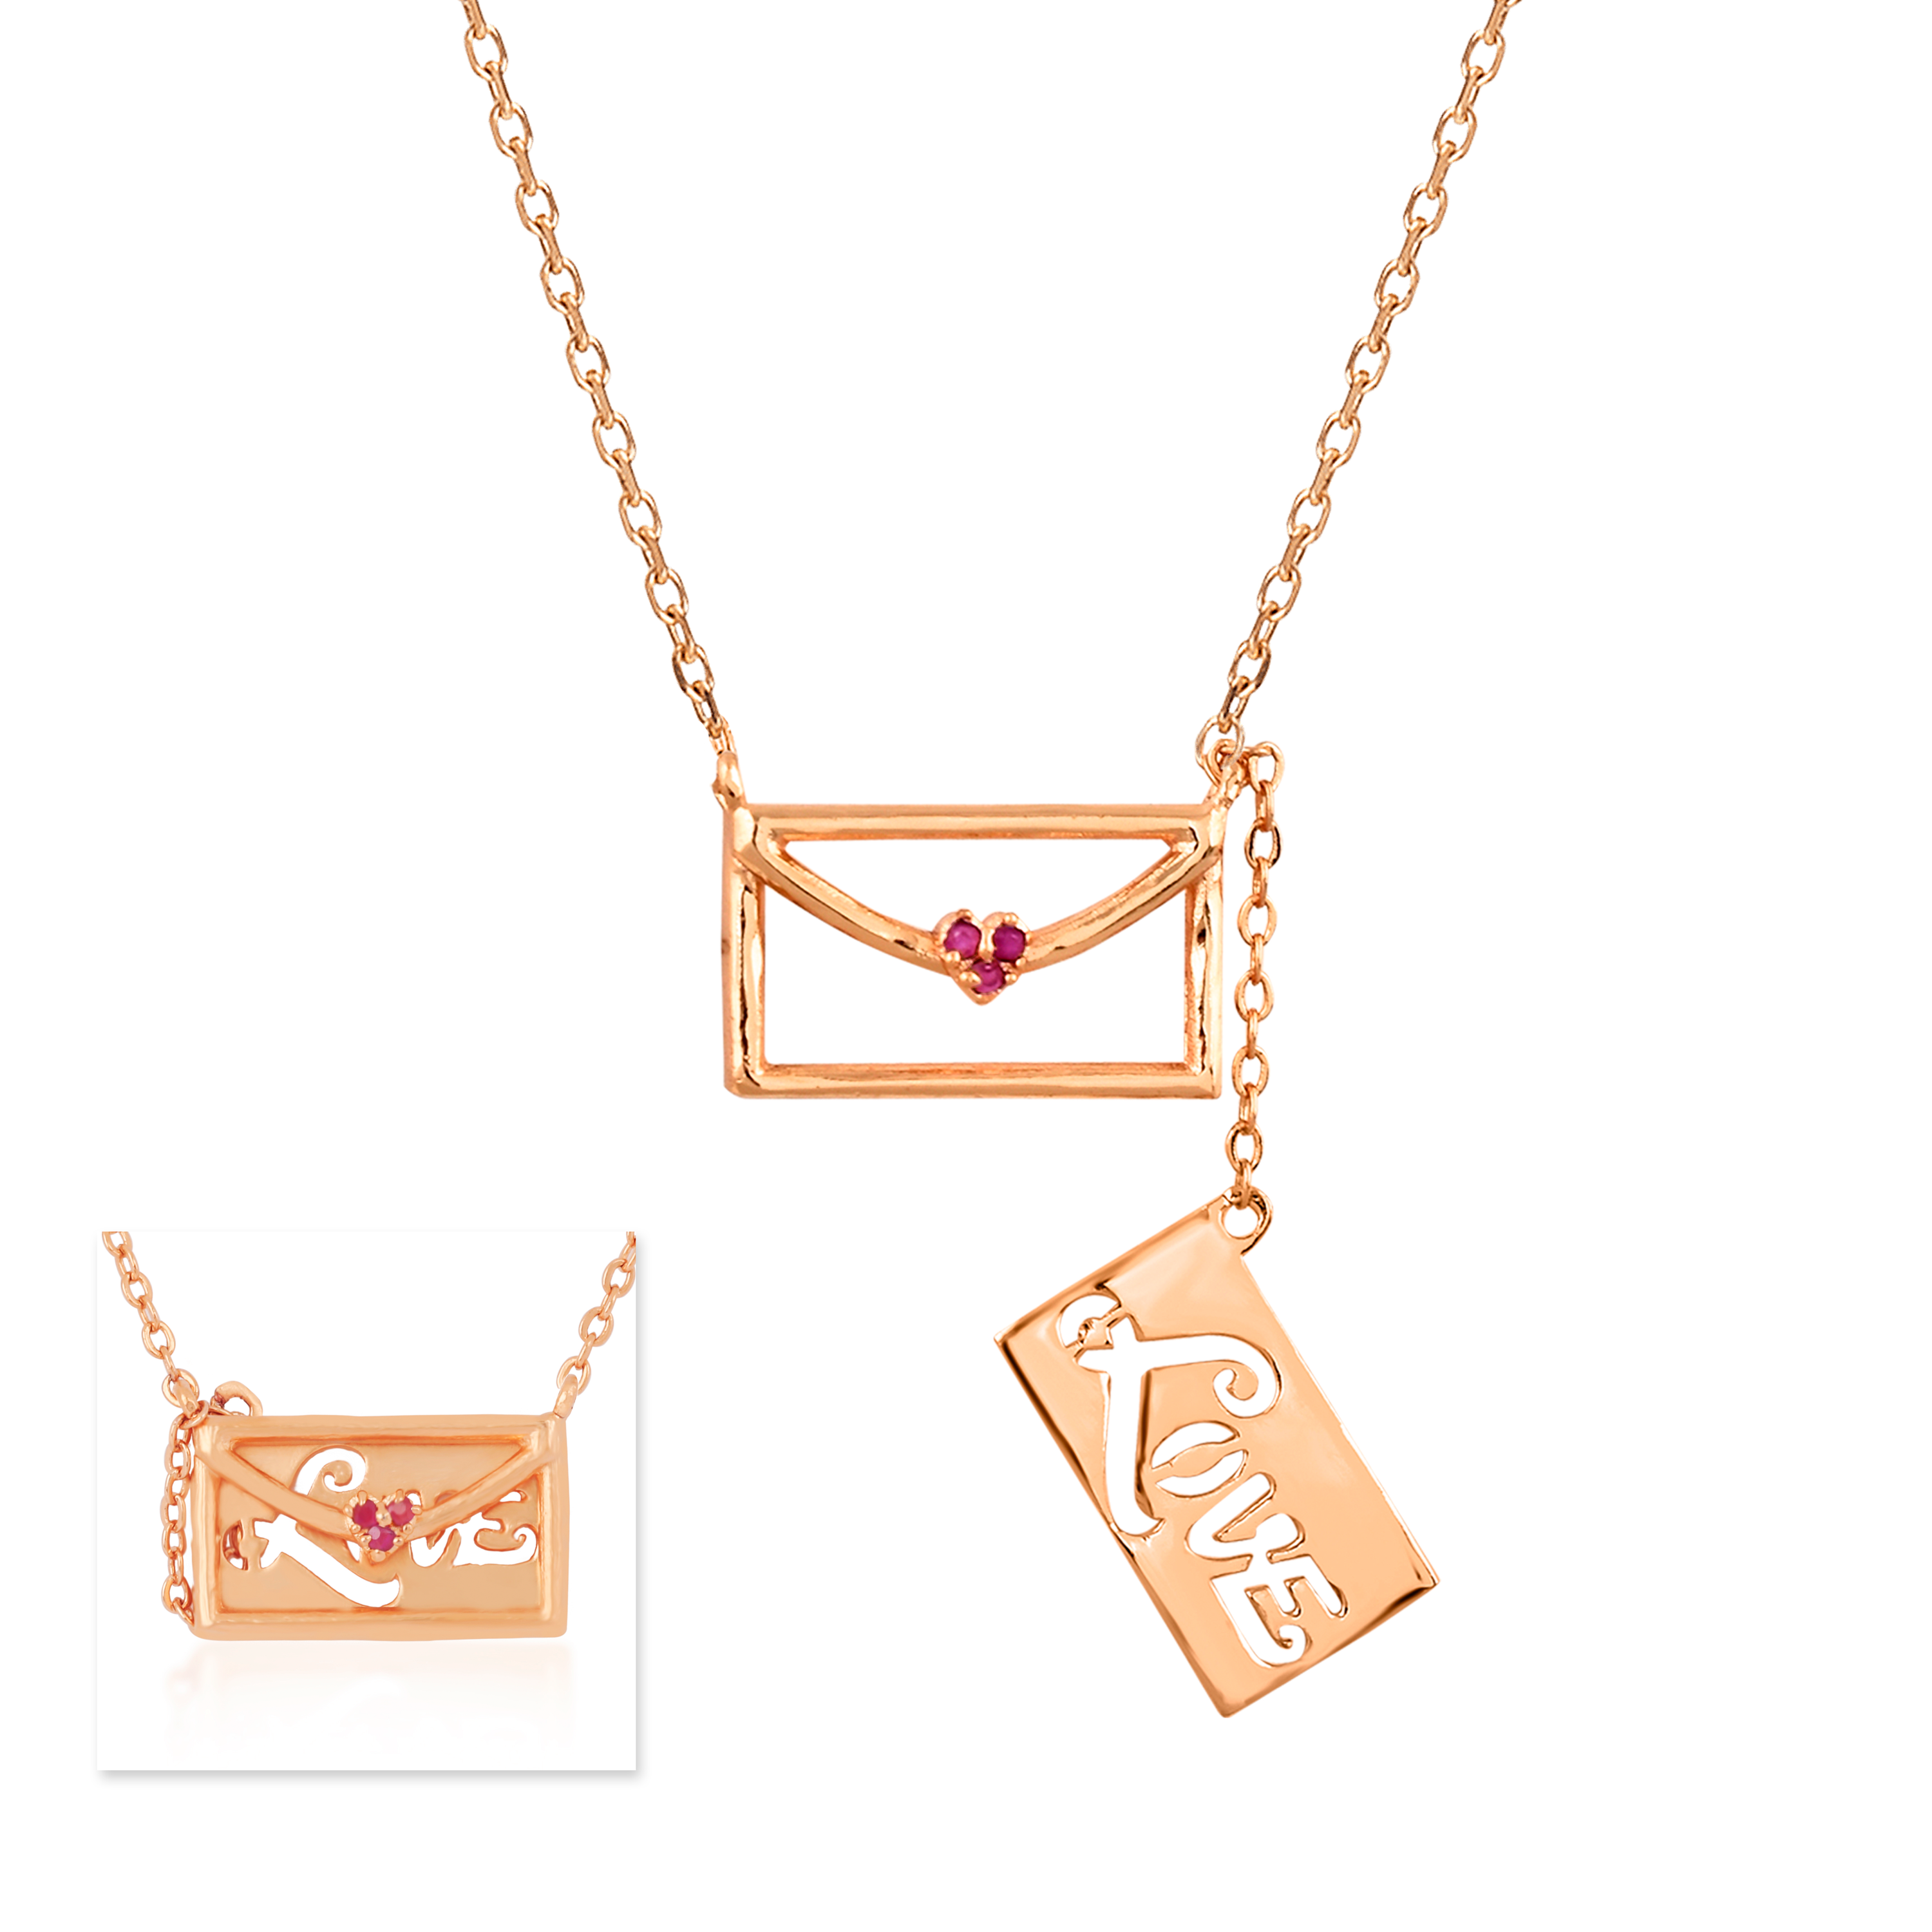 Womens White Gold Plated Love Envelope Pendant Necklace